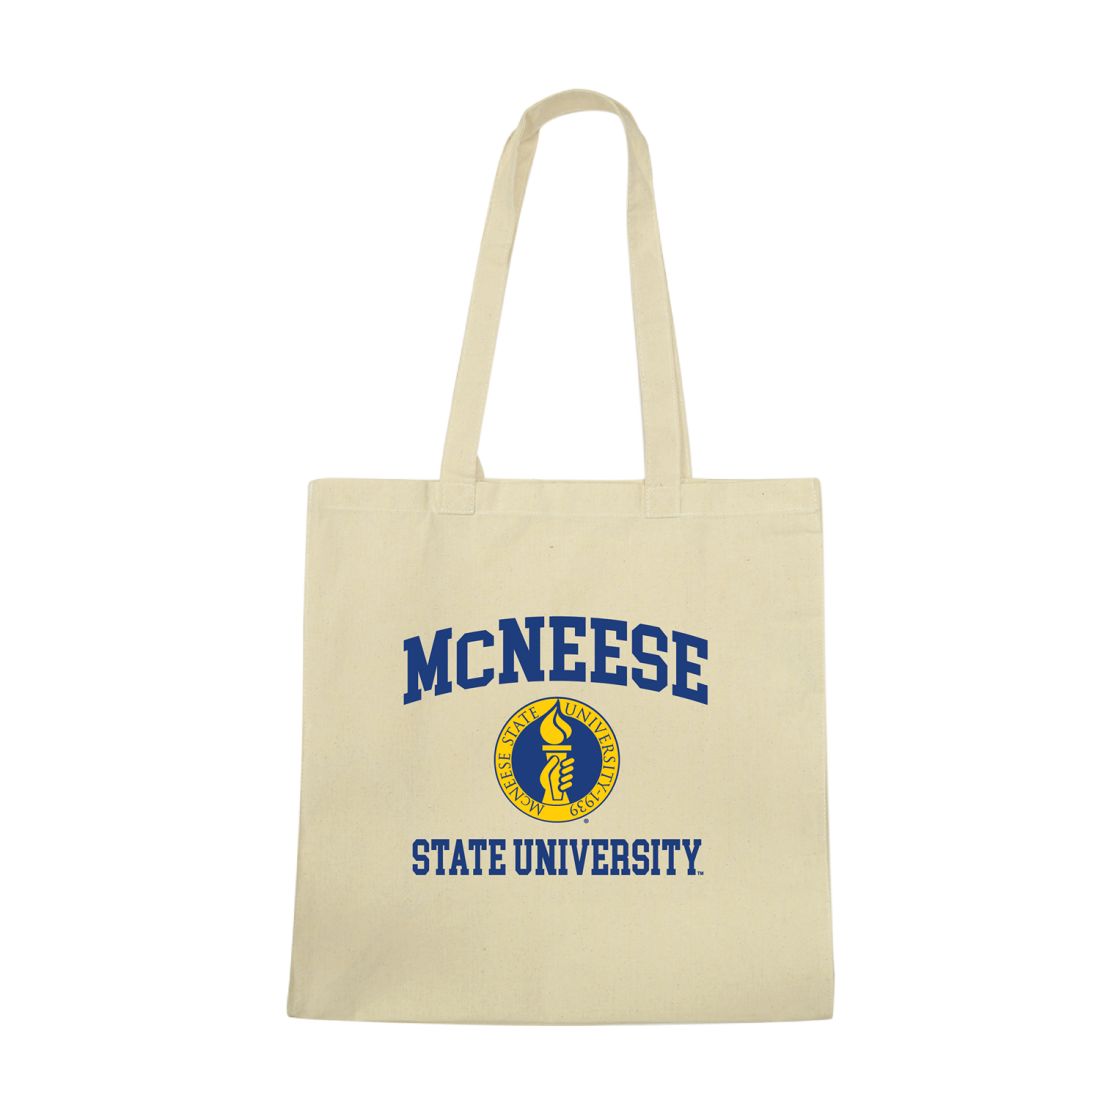 McNeese State University Cowboys and Cowgirls Institutional Seal Tote Bag